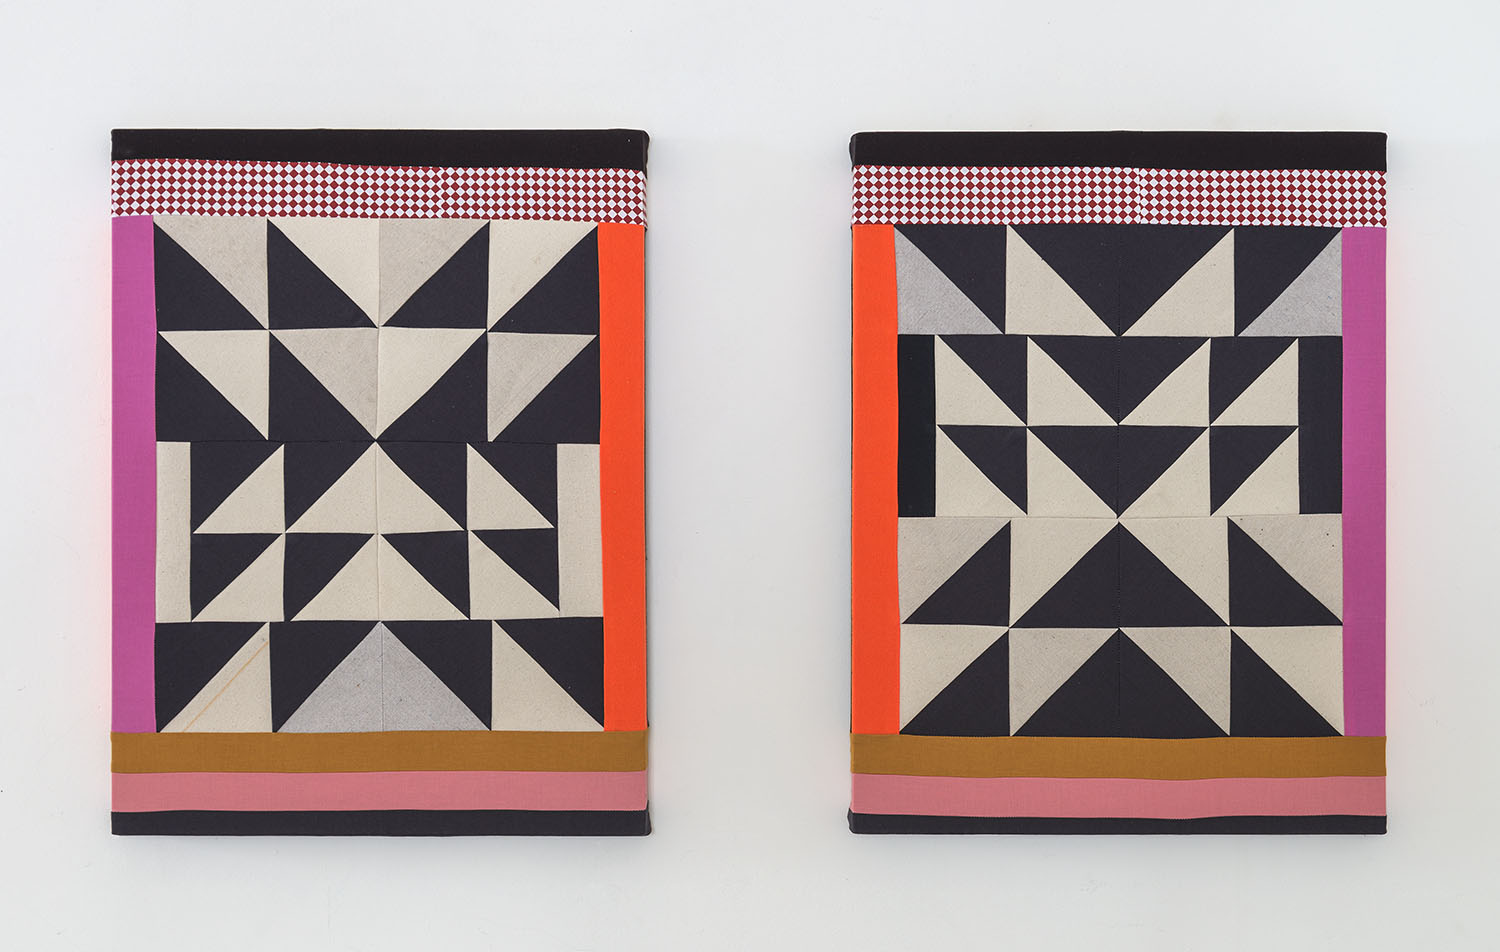    Lucky Star (Diptych)  , 2018 Sewn cotton, canvas, colored pencil 24 x 18 inches each (61 x 45.7 cm each) 